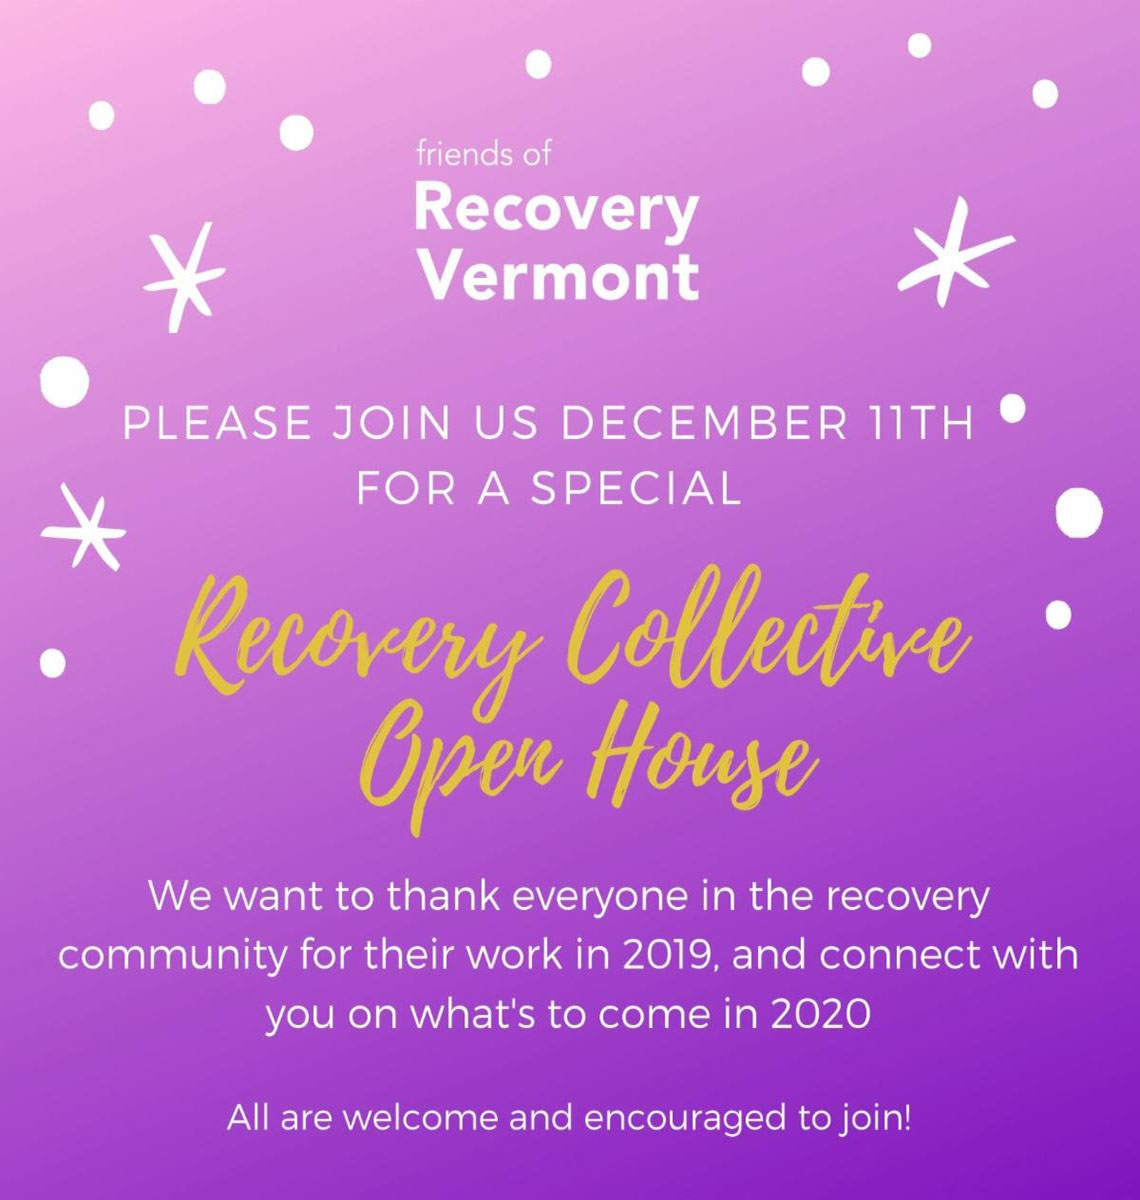 Friends of Recovery Vermont invites you to Recovery Collective Open House!